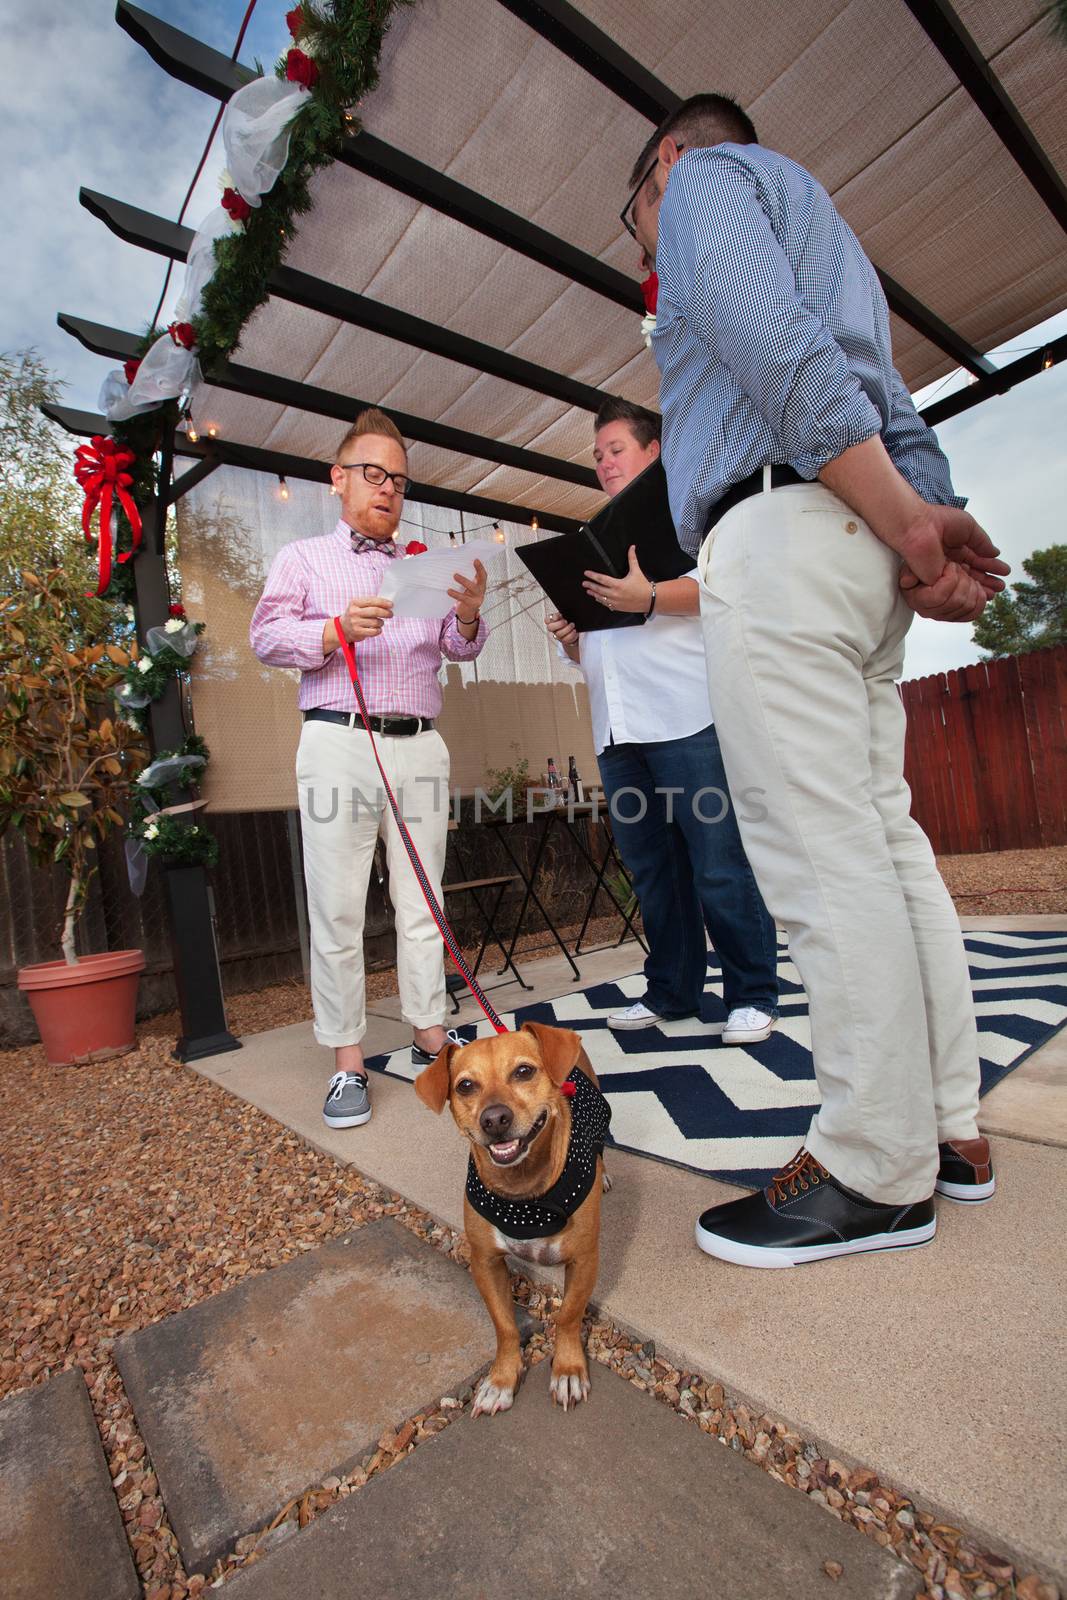 Dog on leash in marriage of gay men outdoors